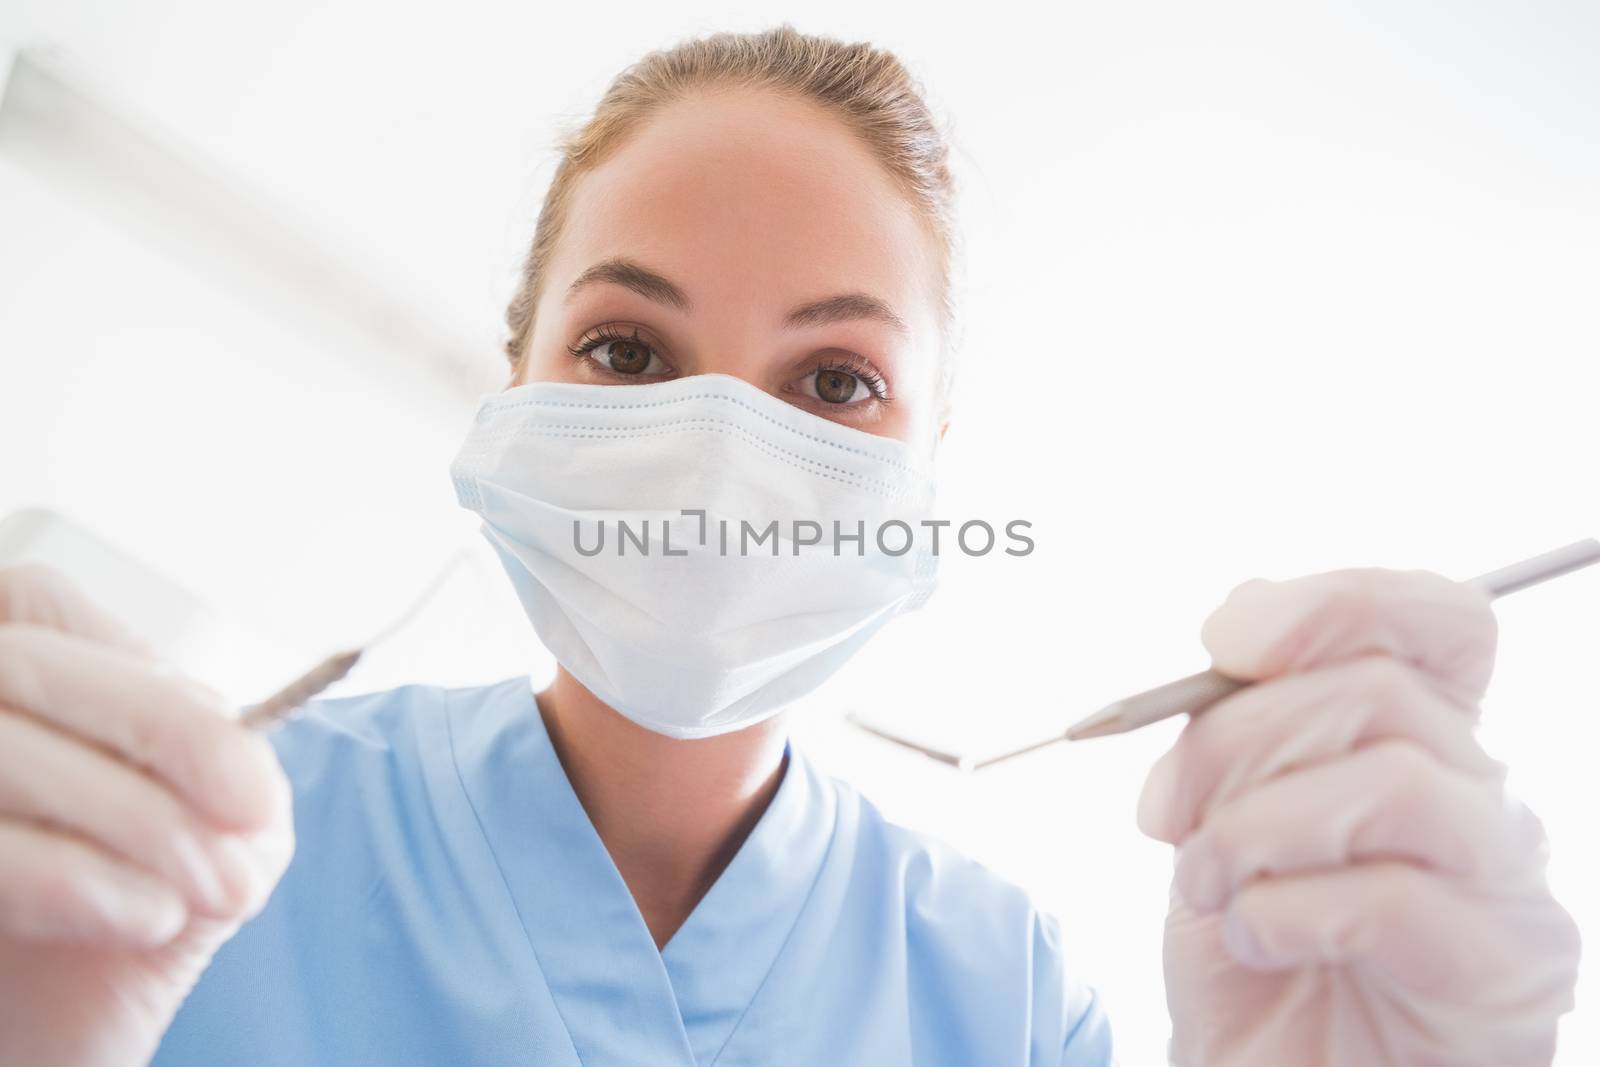 Dentist in surgical mask holding tools over patient by Wavebreakmedia